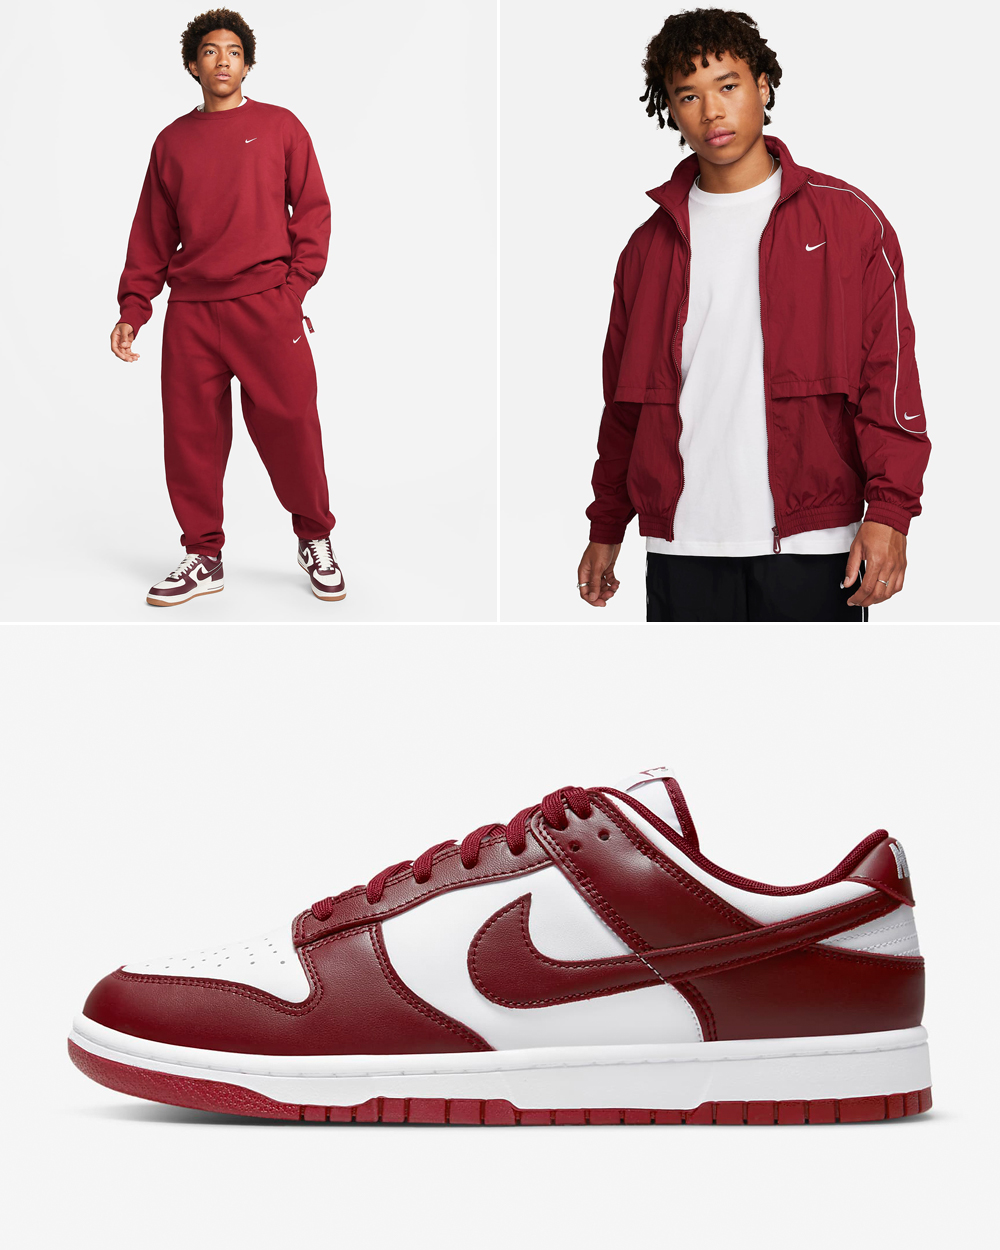 Nike-Dunk-Low-Team-Red-Matching-Outfits